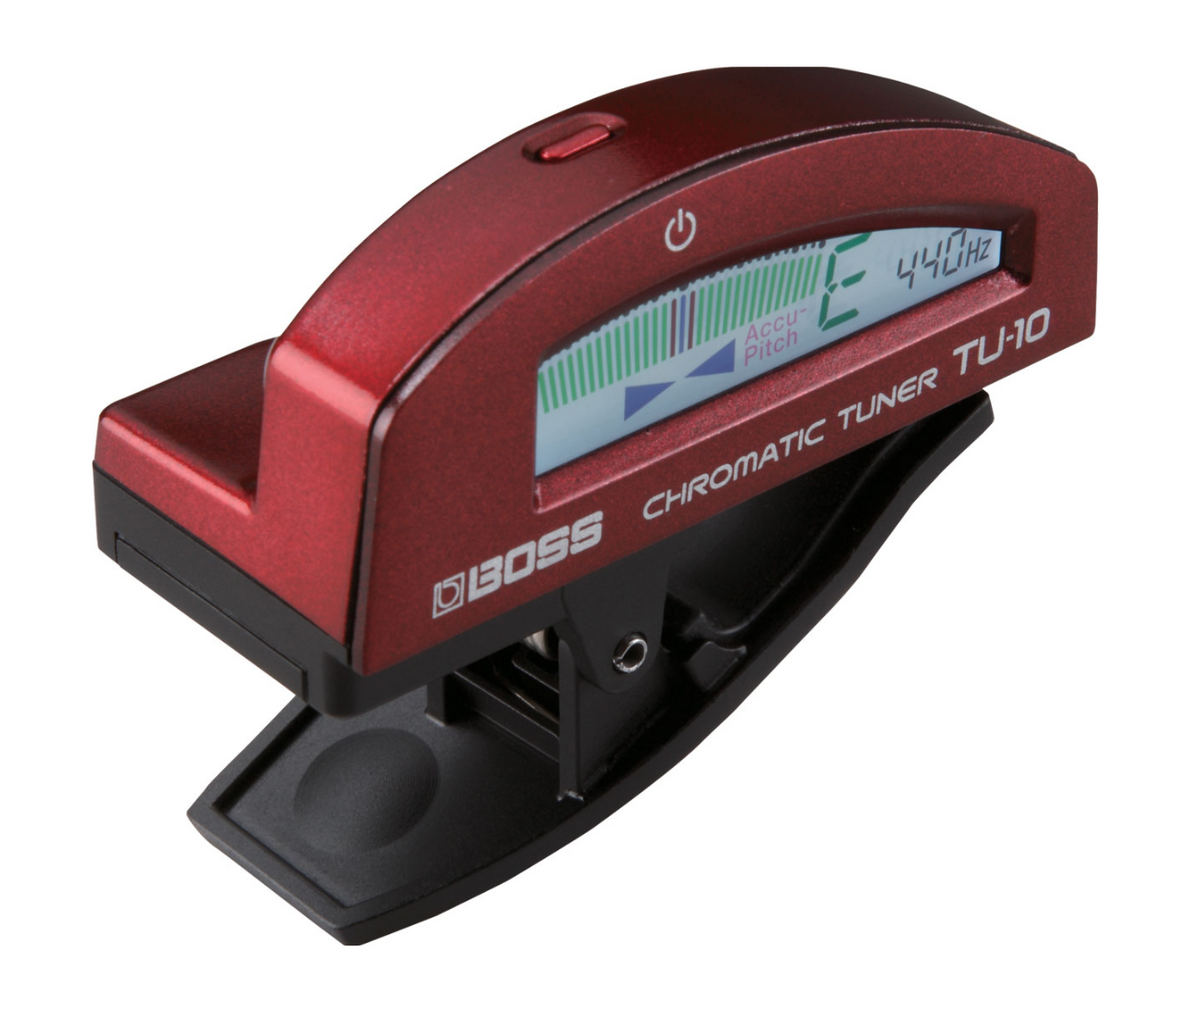 BOSS TU-10 Clip-On Chromatic Tuner Red Best Guitar Tuner with Accu-Pitch Function, Flat Tuning up to 5 Semitones, and Stream Mode